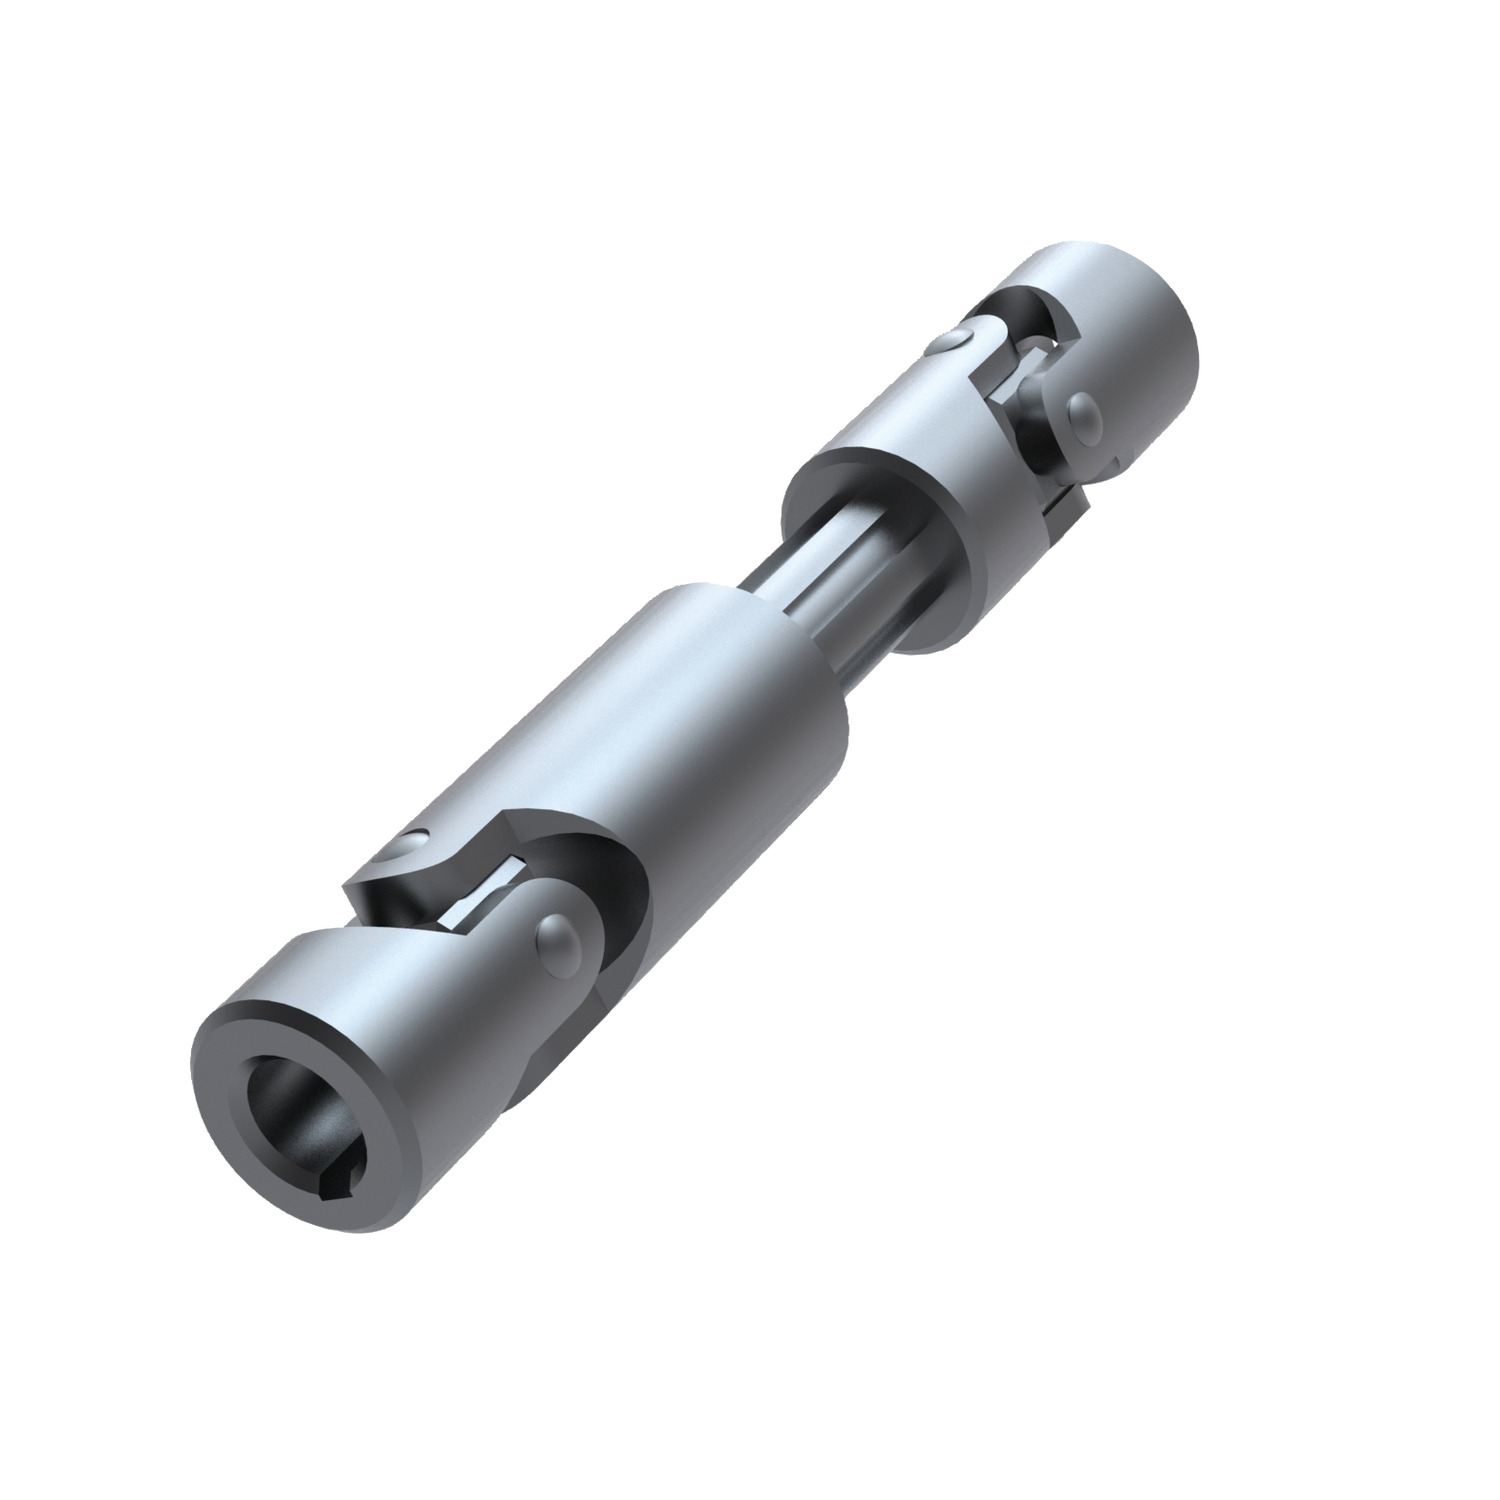 Telescopic Universal Joints Steel telescopic universal joints manufactured to DIN 808. Keyway both ends. Maximum bending angle of 45° per joint.